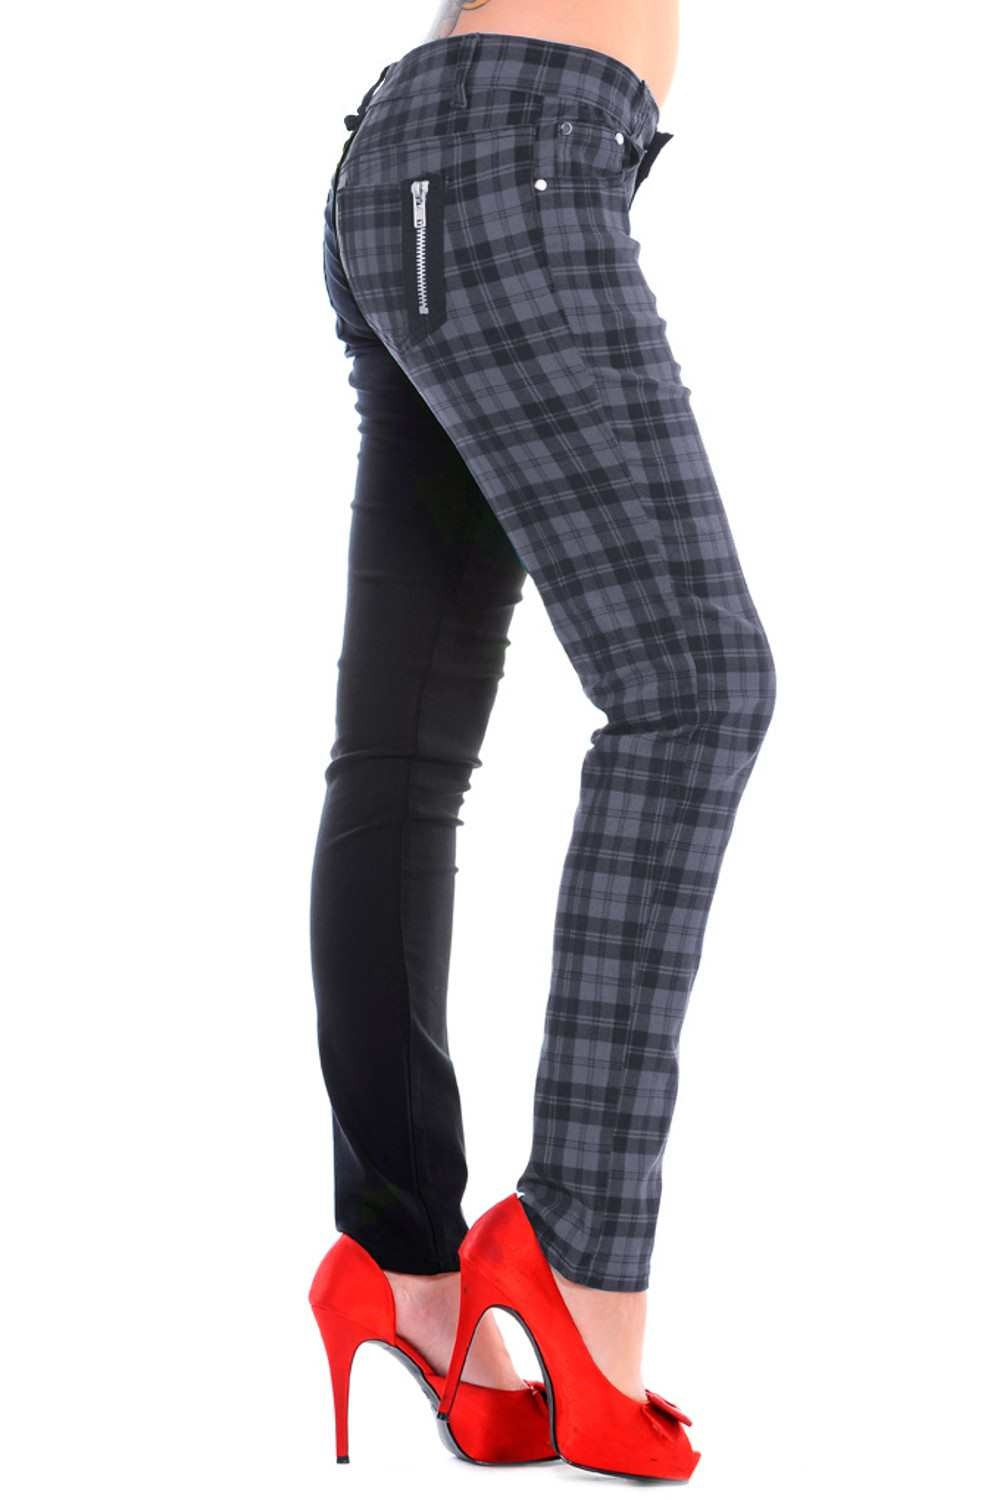 Low rise skinny jeans with one black leg and one grey check leg